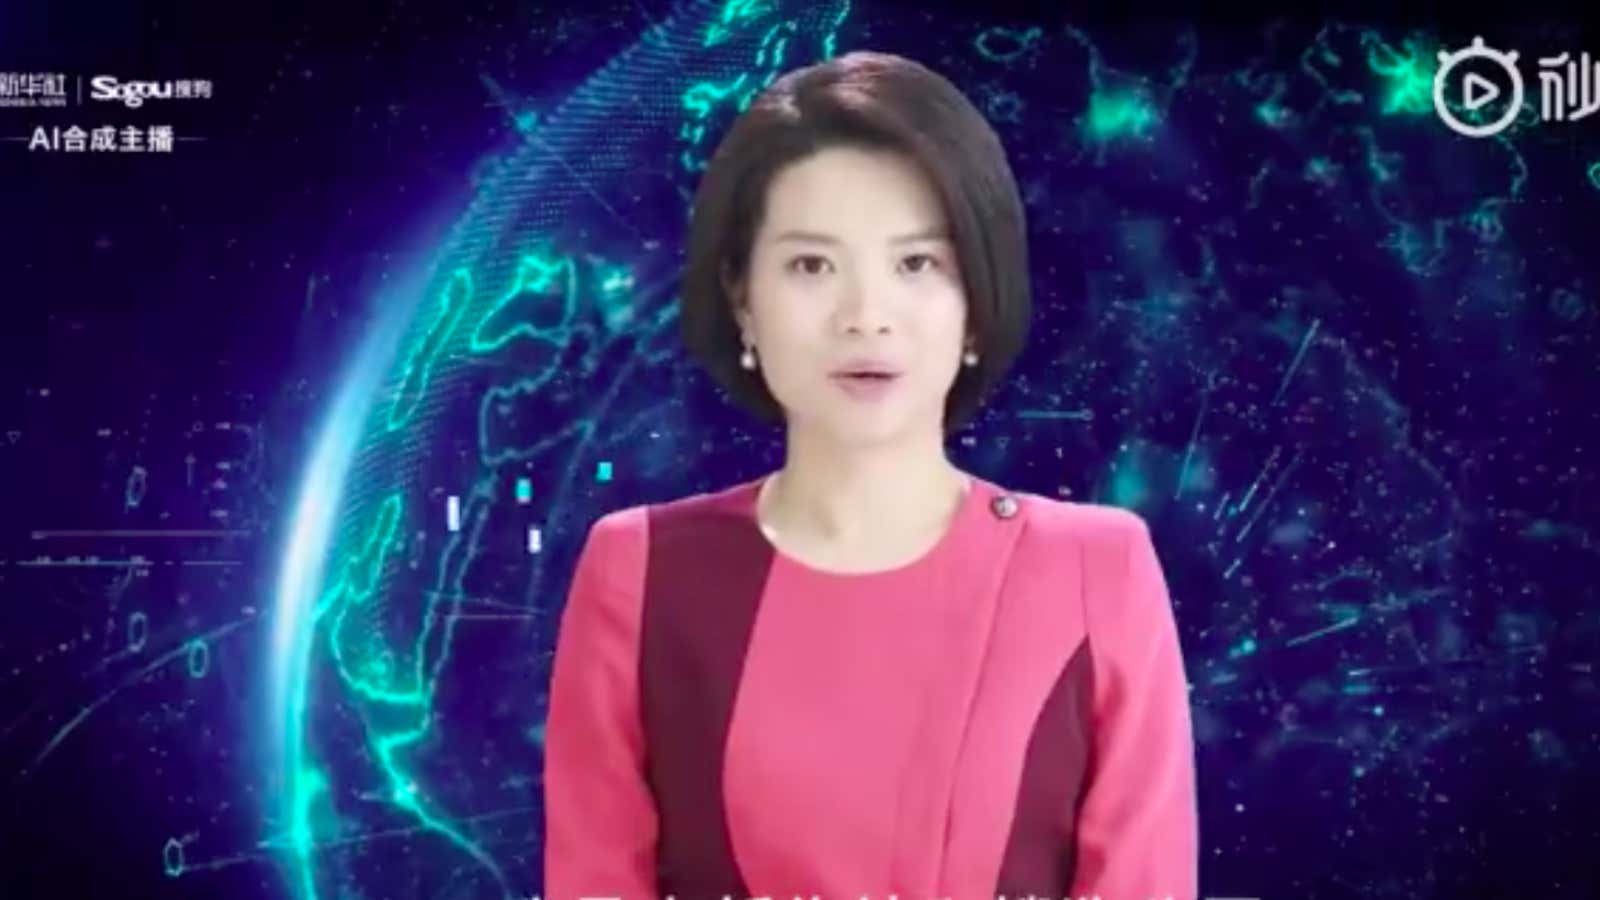 Chinese state media’s latest innovation is an AI female news anchor